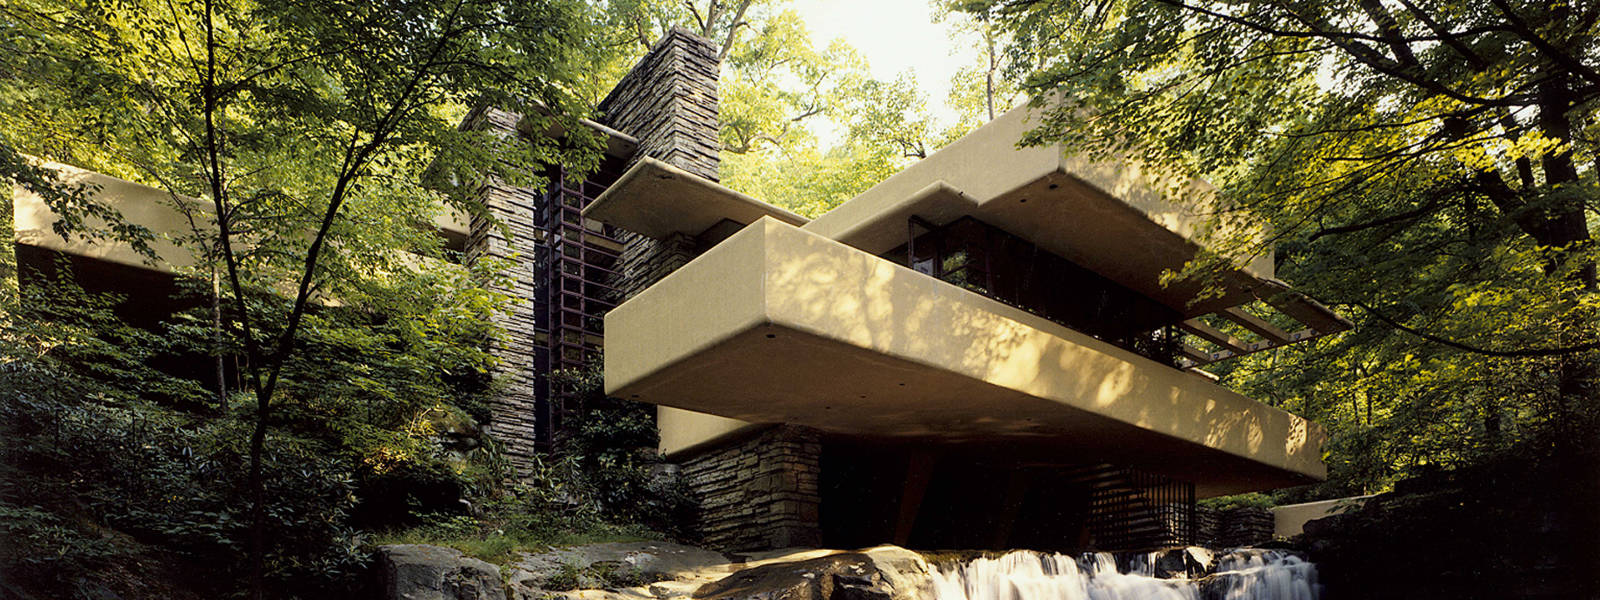 Helping Fallingwater Live on: An Inside Look at Current and Future Preservation Efforts